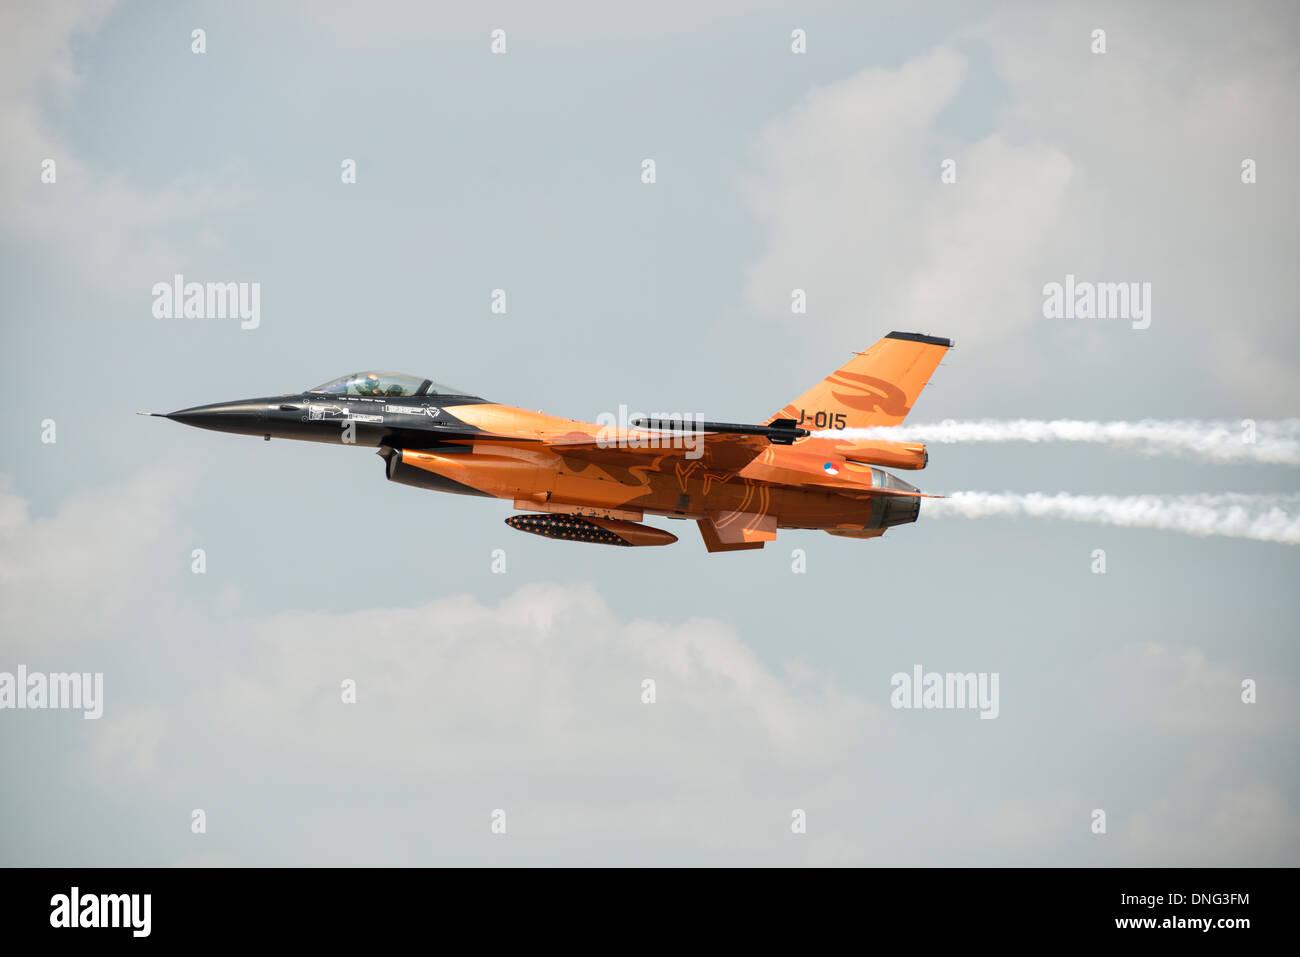 Lockheed Martin F-16 fighter jet of the Royal Netherlands Air Force demonstration team in it's orange livery arrives at the RIAT Stock Photo